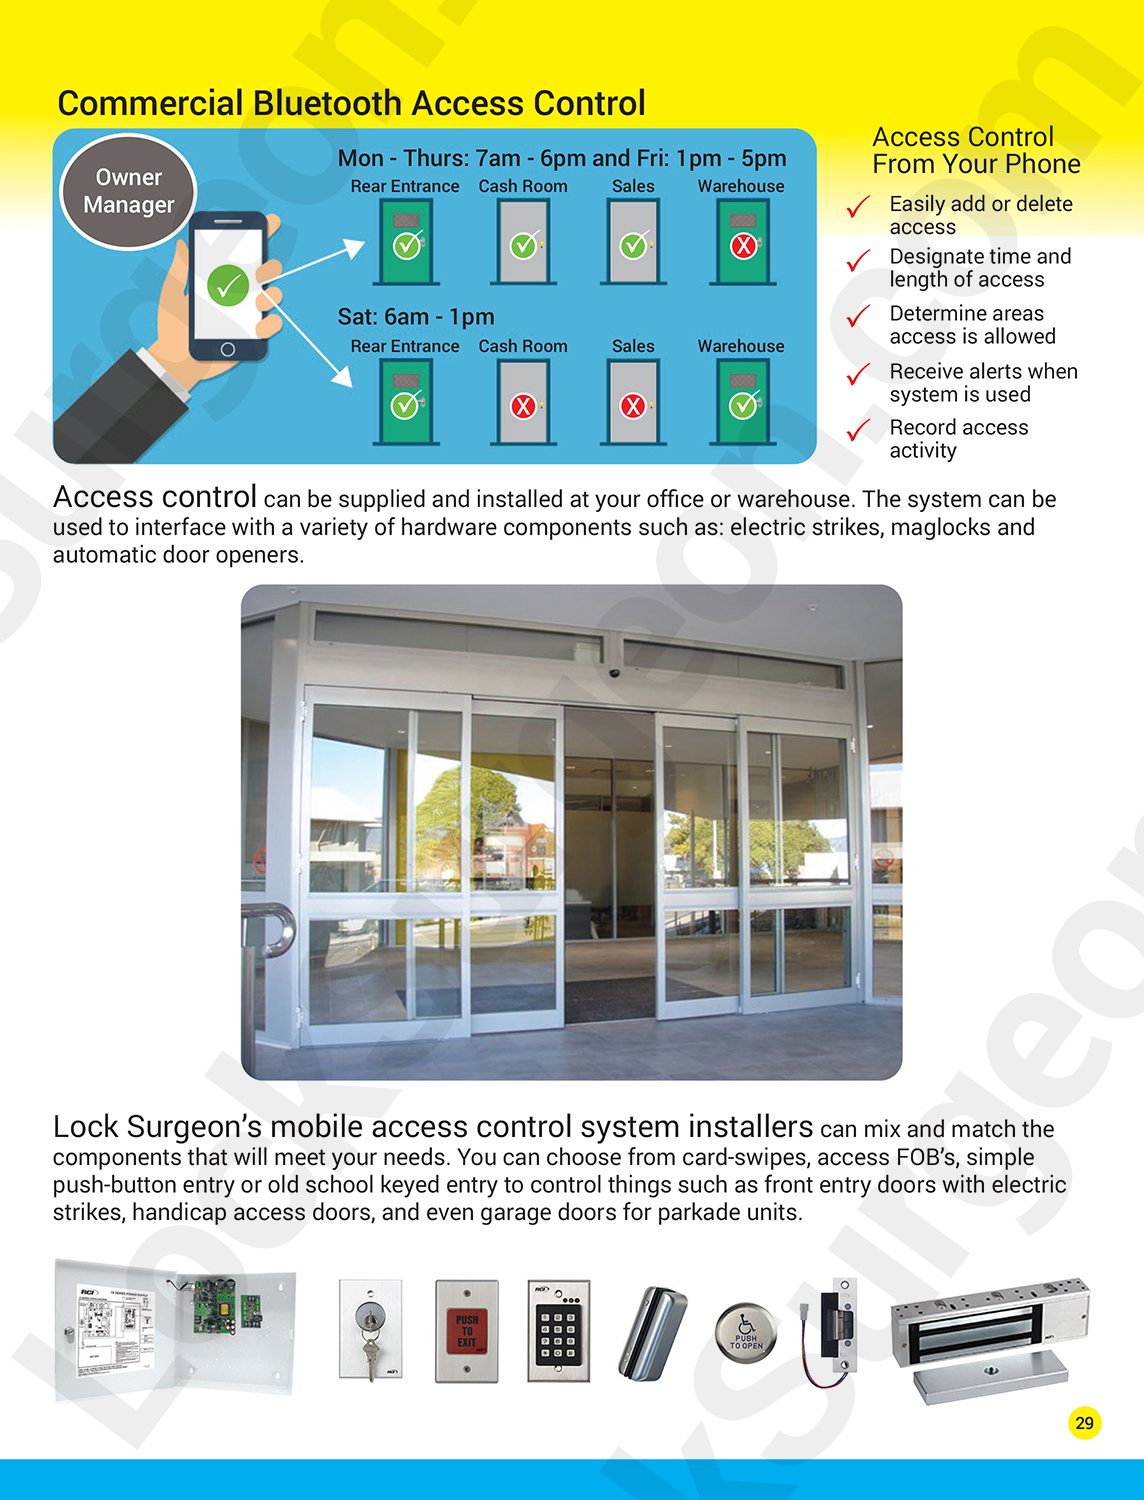 Commercial bluetooth access control supplied & installed at your office or warehouse by Lock Surgeon